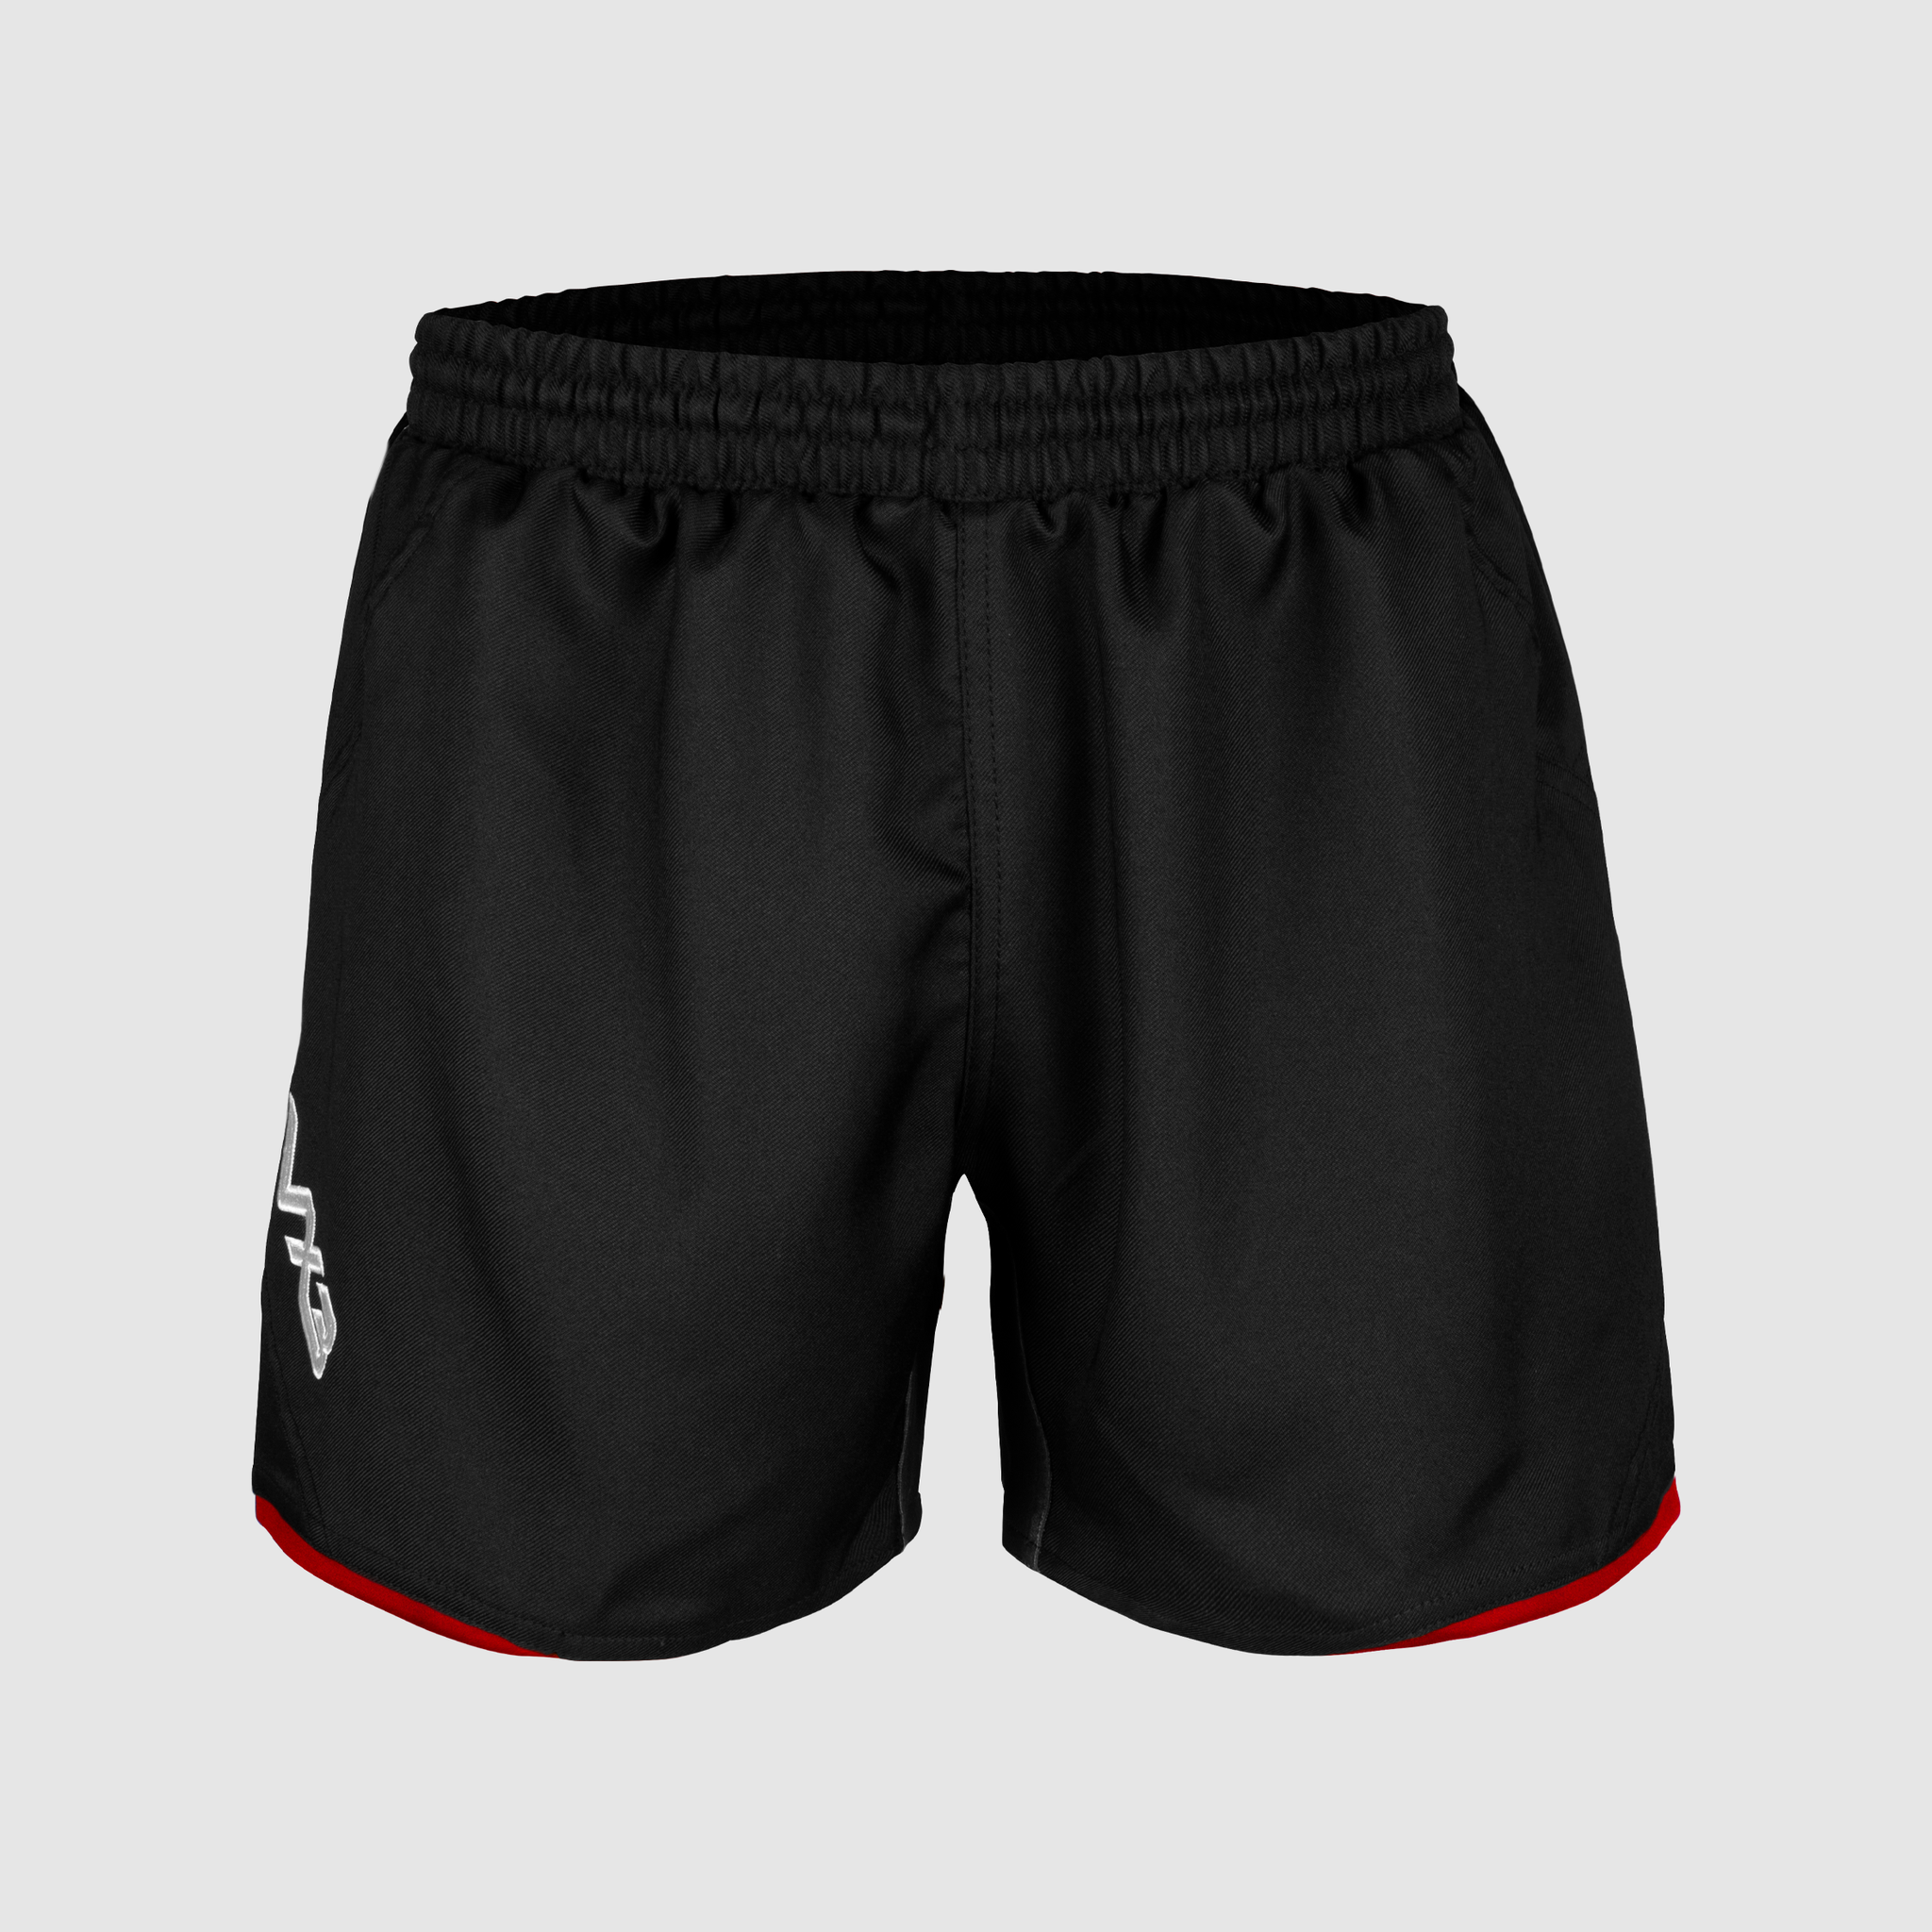 Prima Youth Rugby Shorts Black/Red